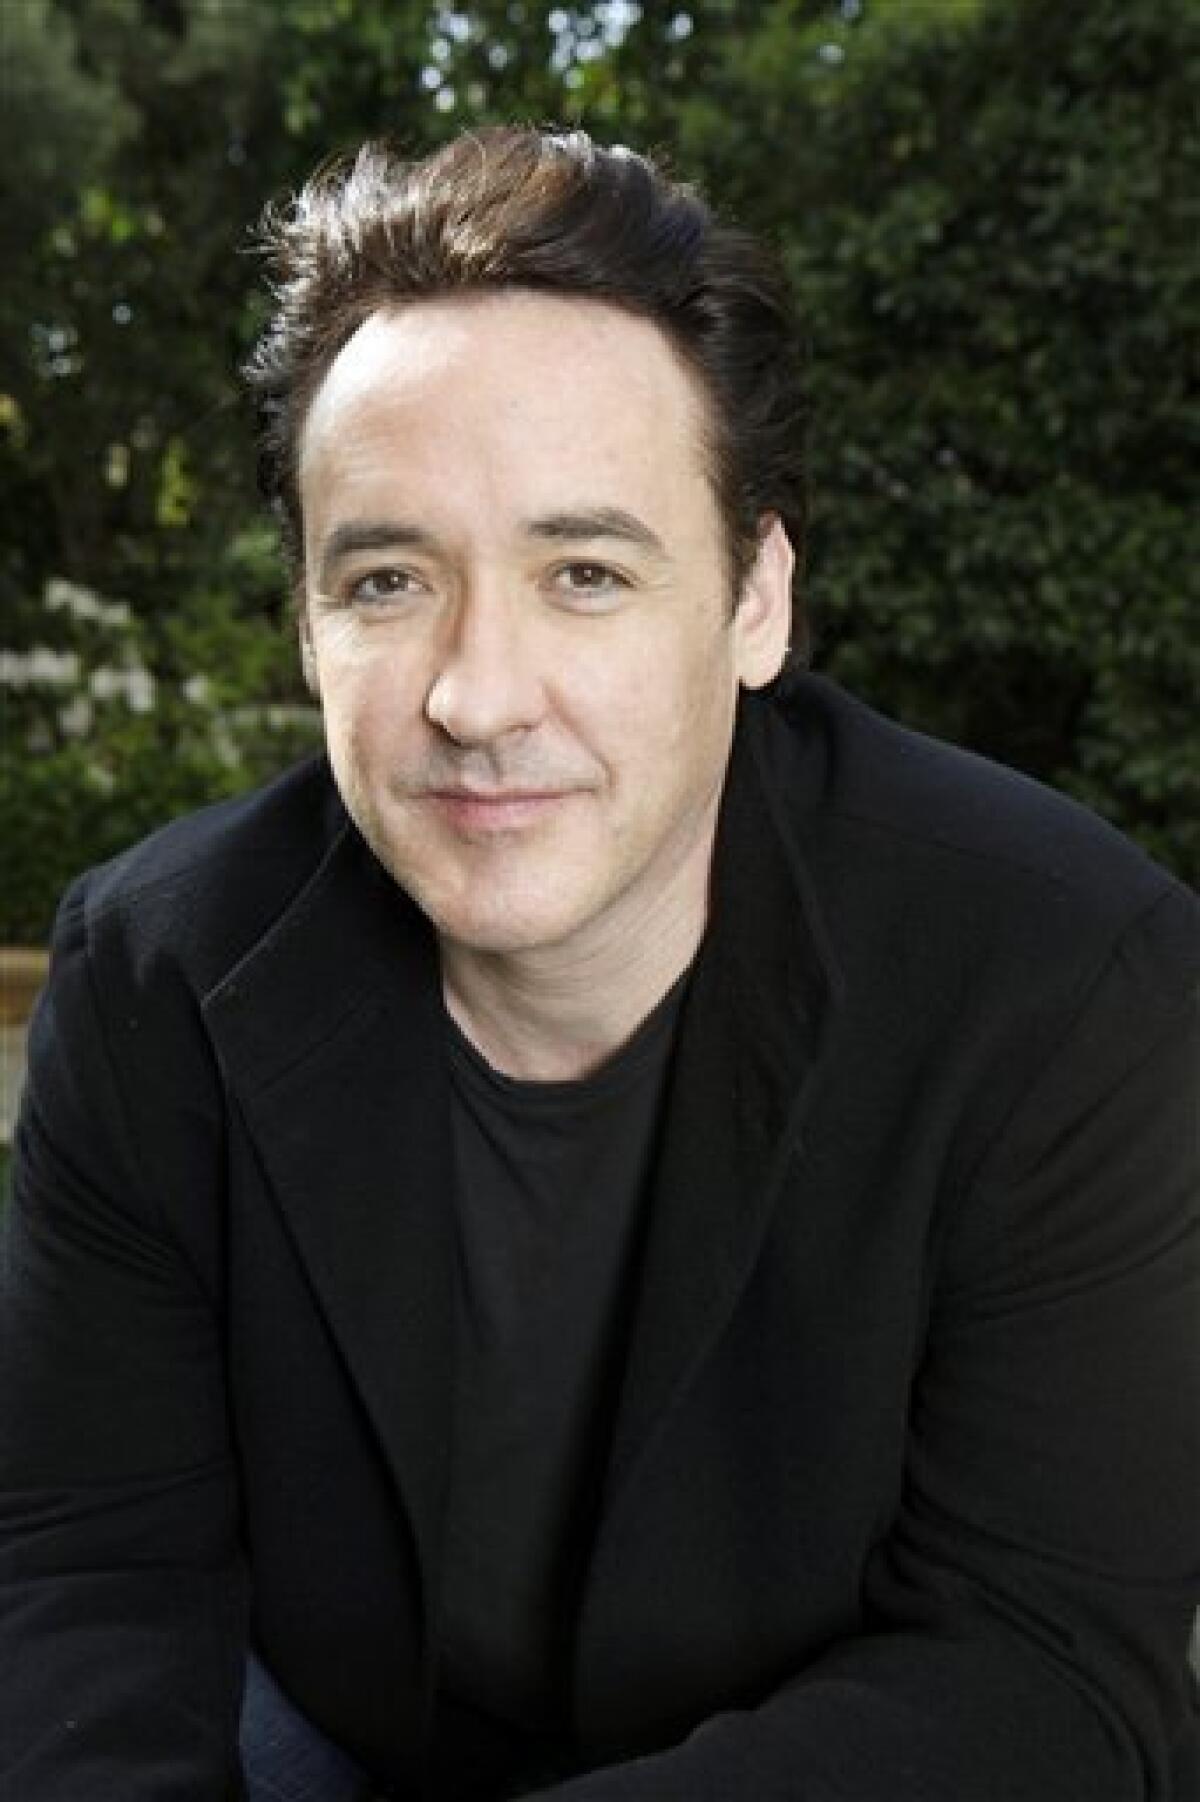 In this March 20, 2010 photo, actor John Cusack poses for a portrait in Los Angeles. (AP Photo/Reed Saxon)